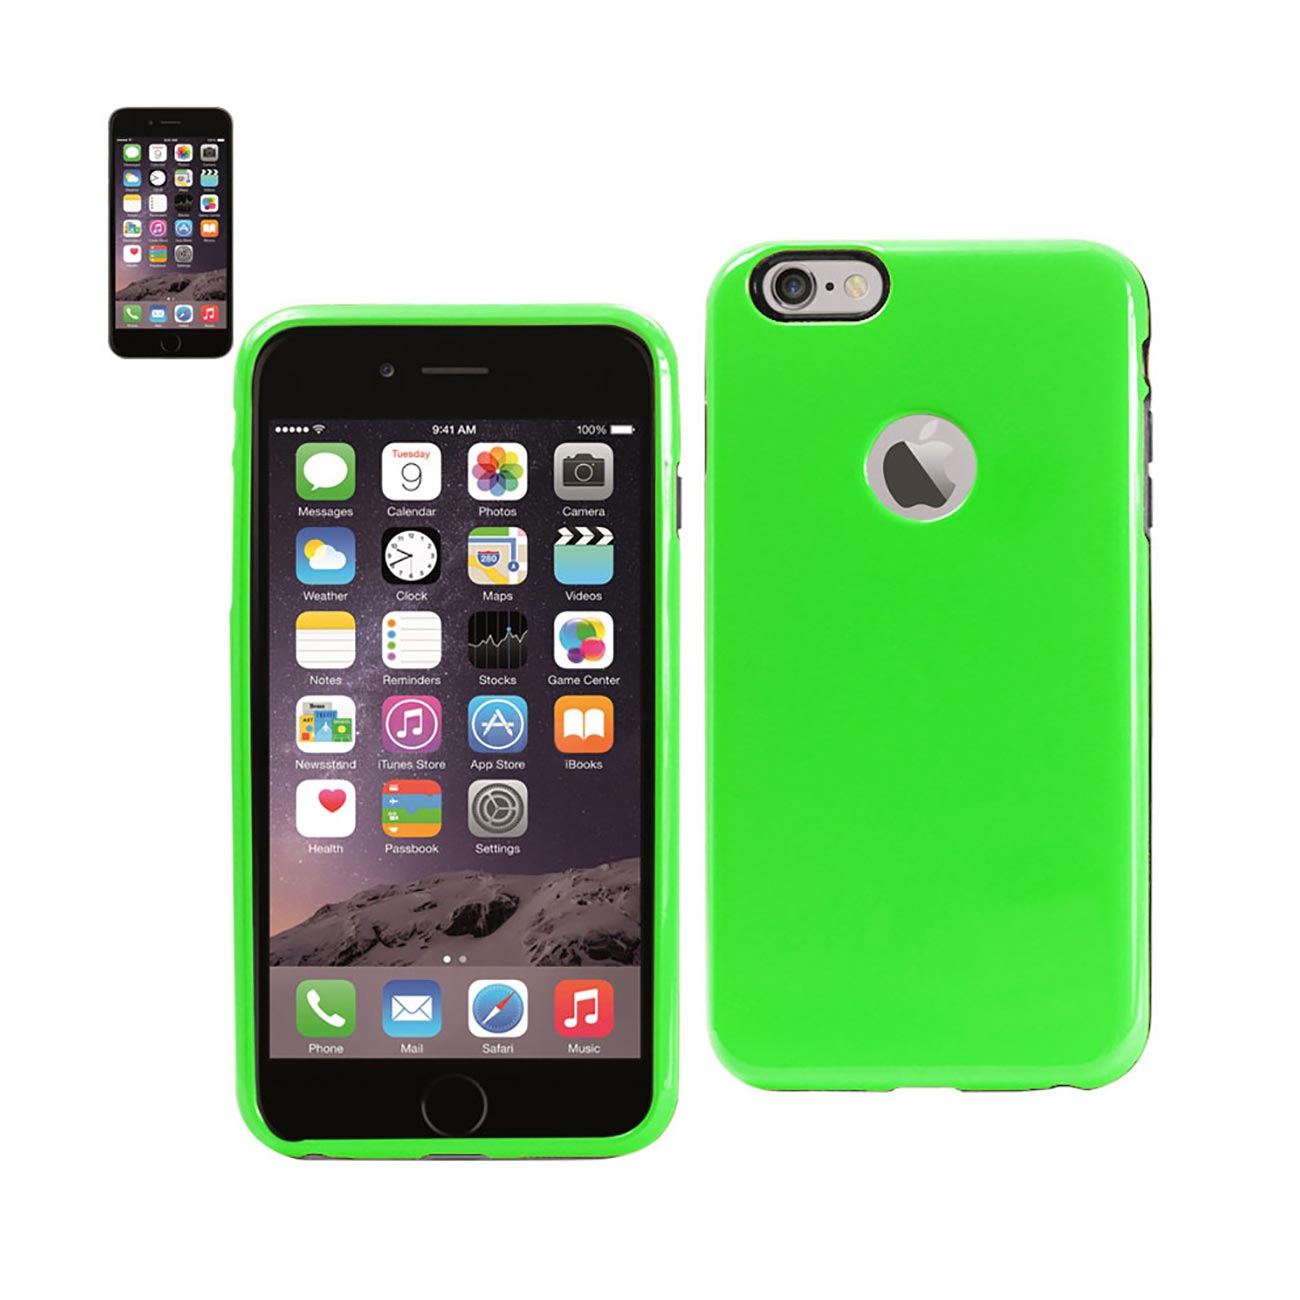 Case Slim Armor Candy Shield iPhone 6 Green Color